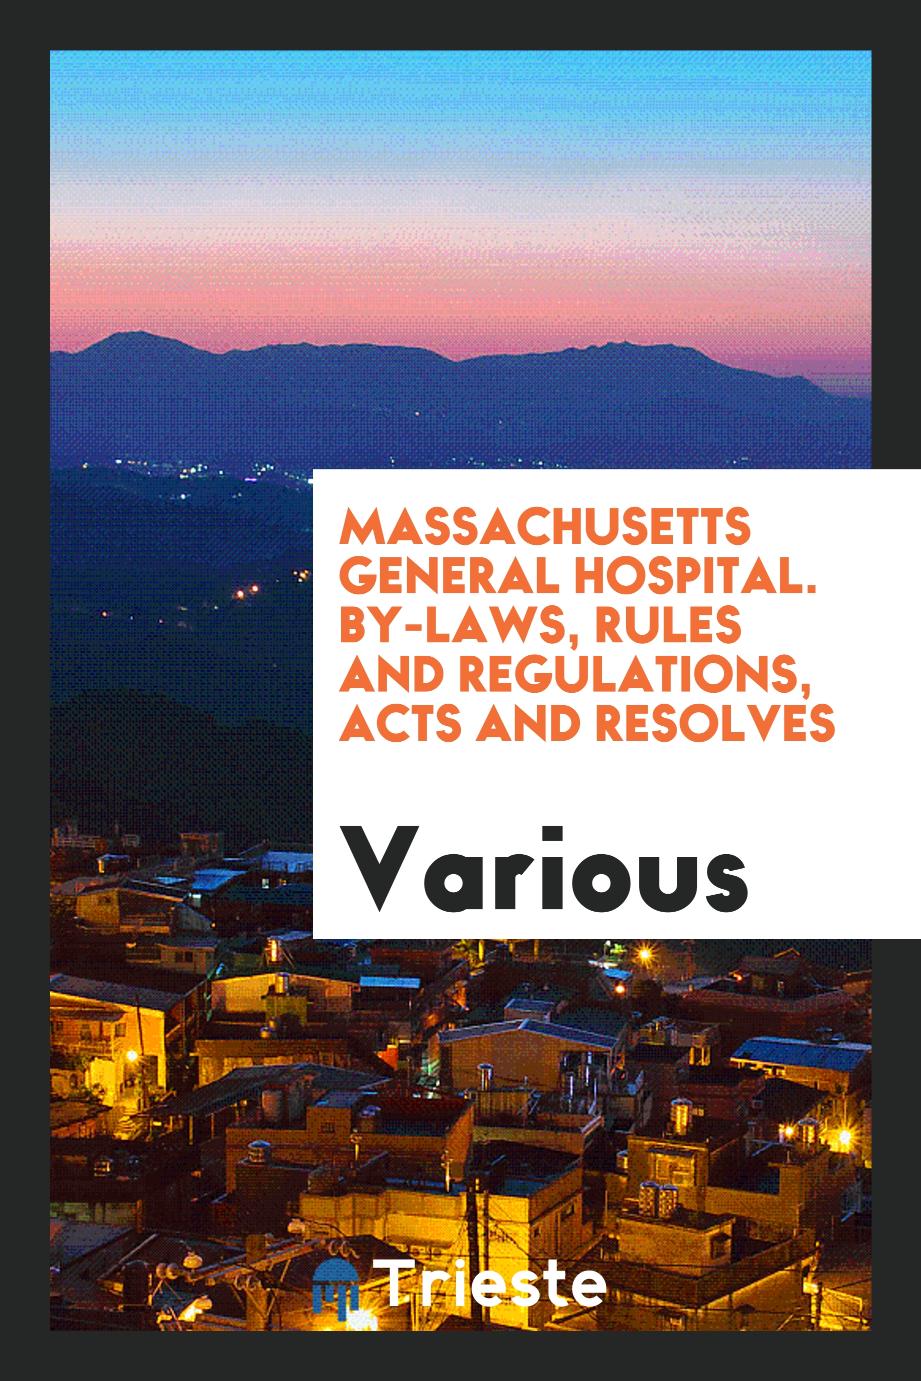 Massachusetts General Hospital. By-Laws, Rules and Regulations, Acts and Resolves